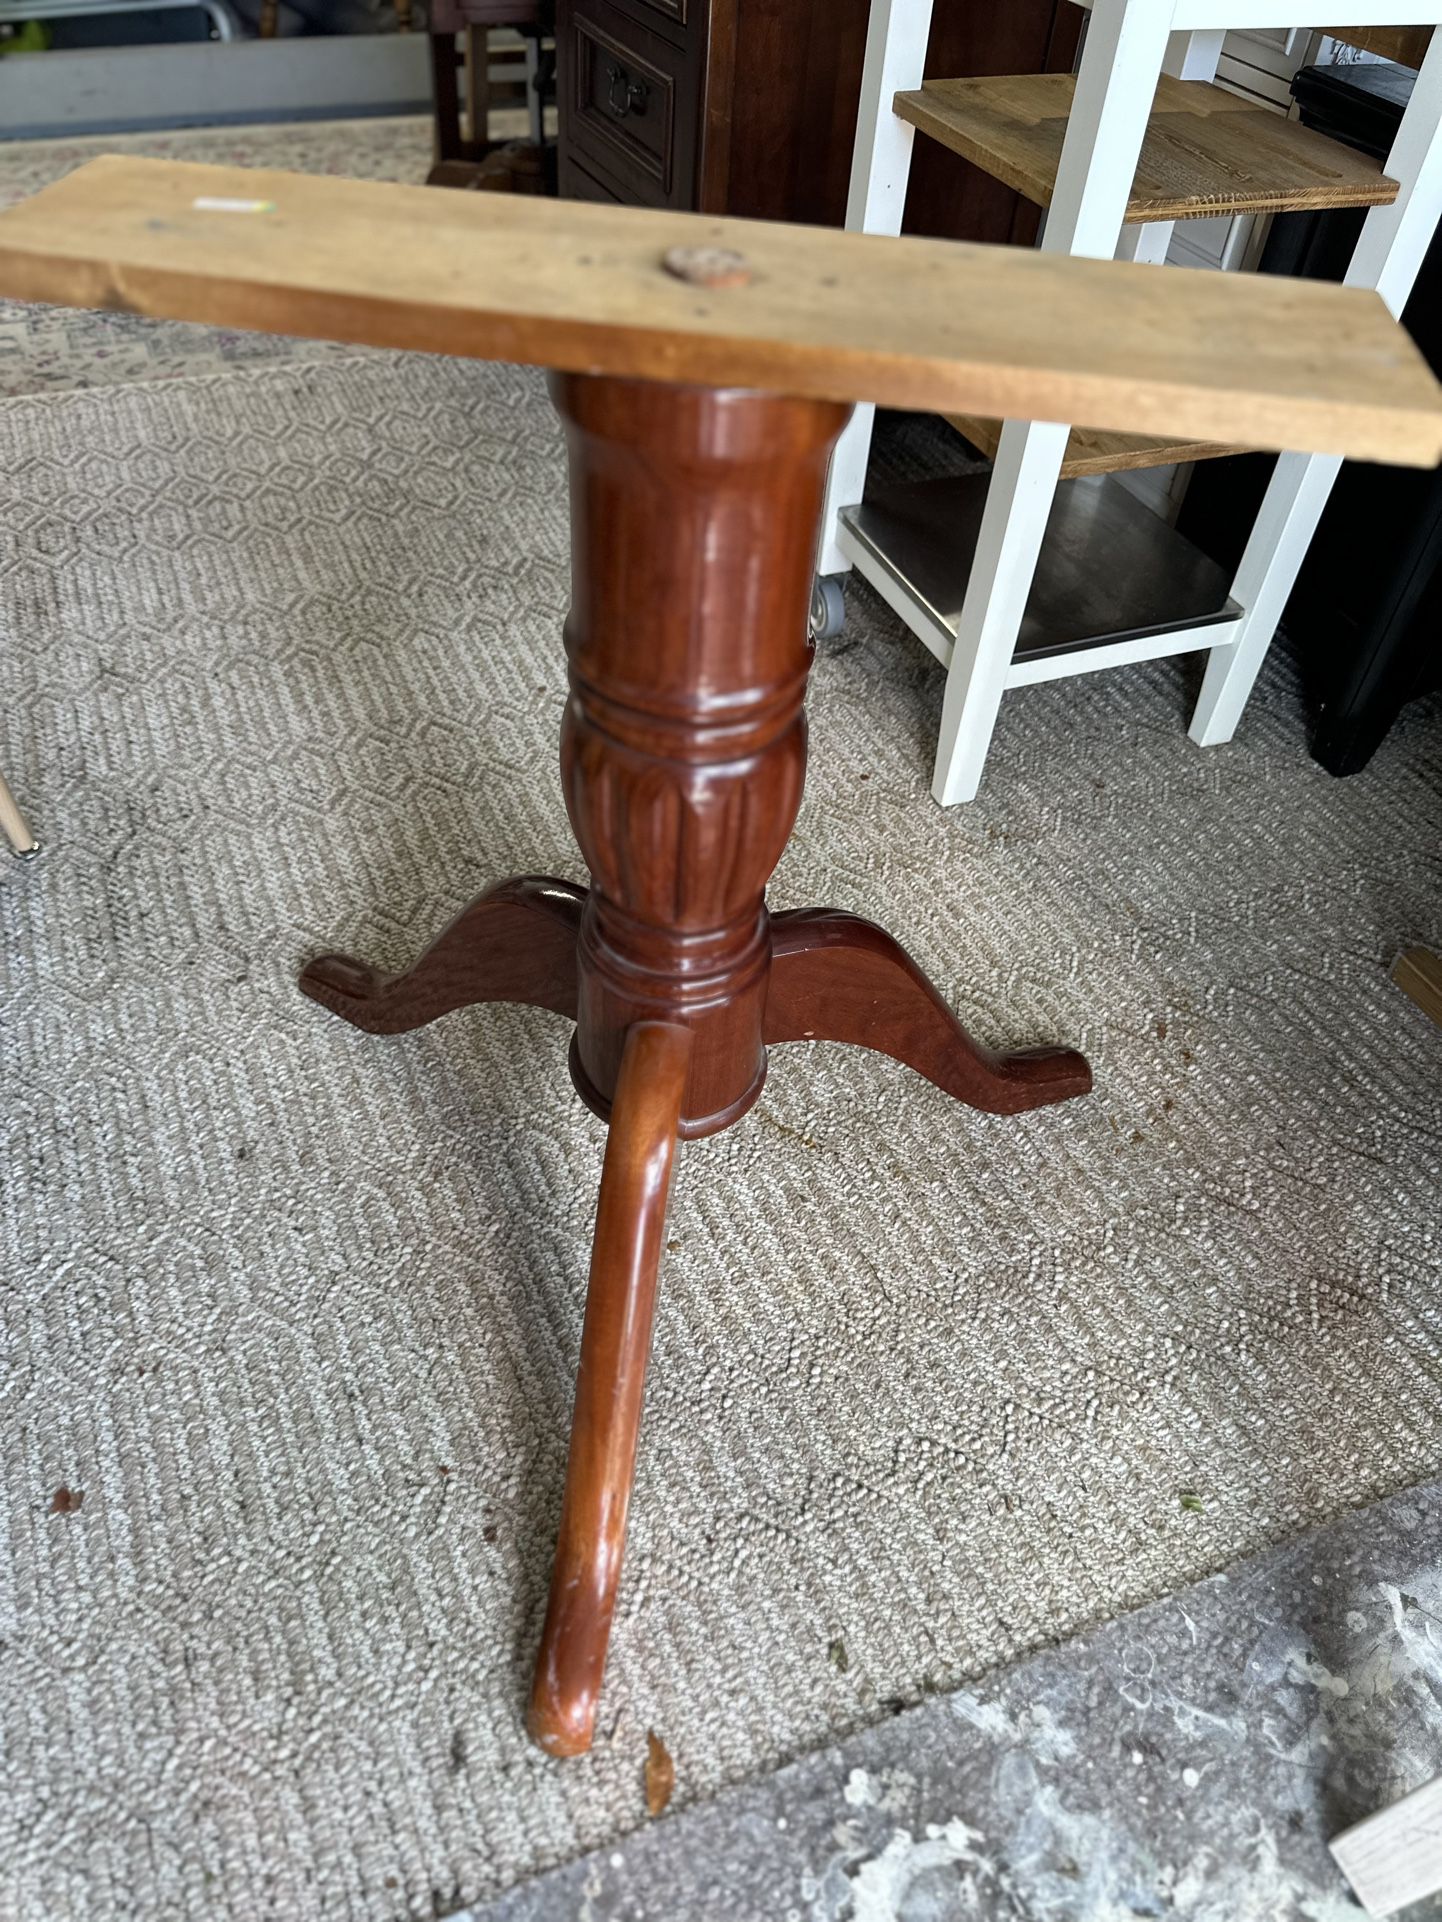 Dining Table Base